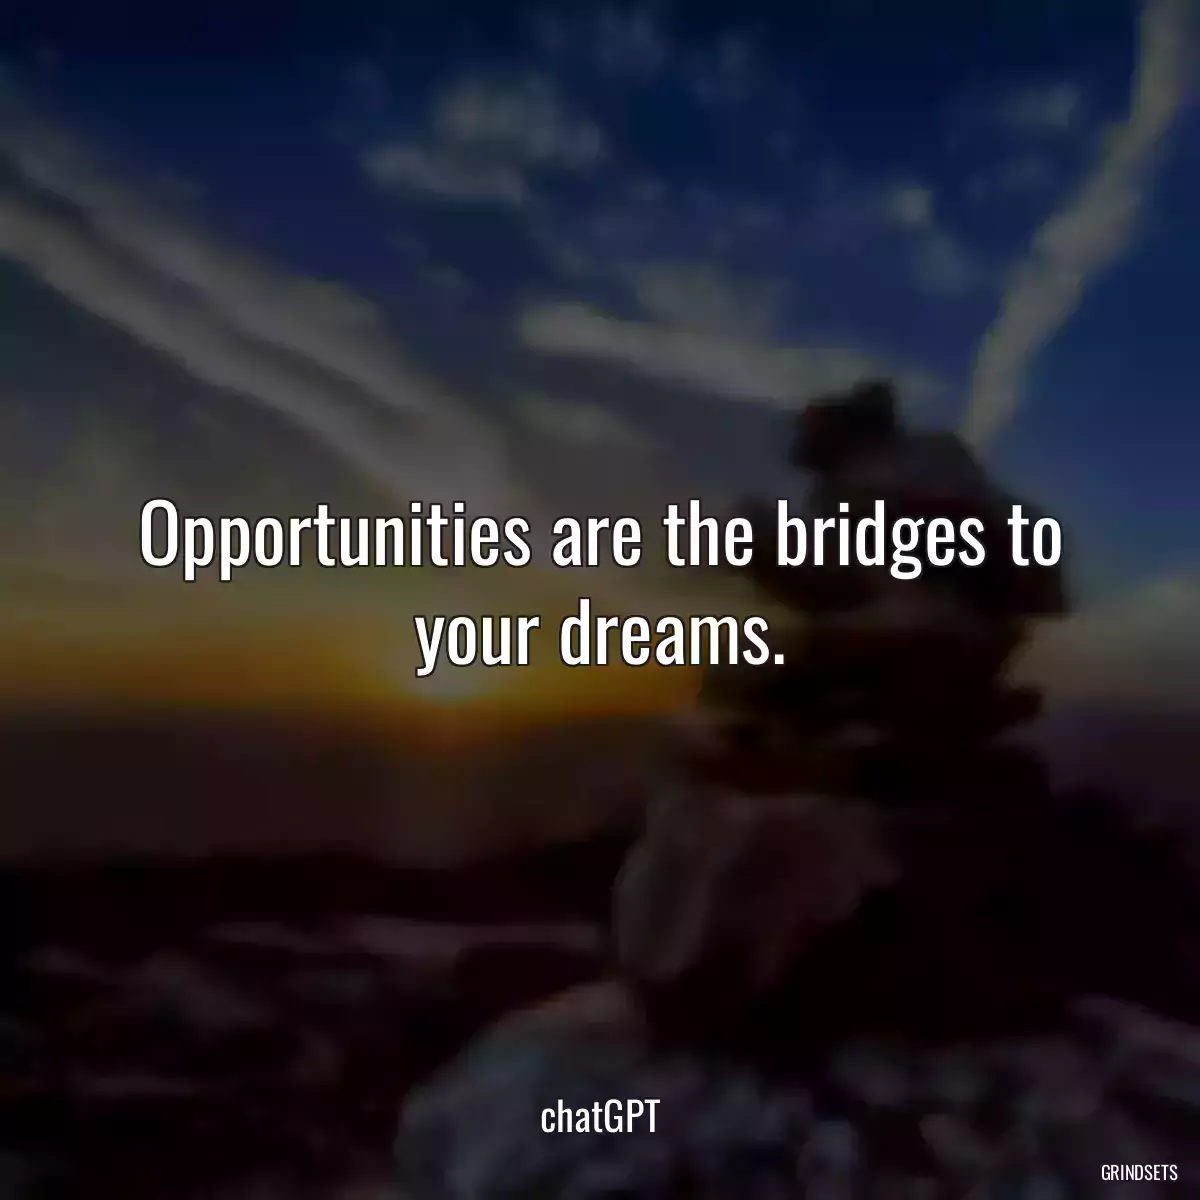 Opportunities are the bridges to your dreams.